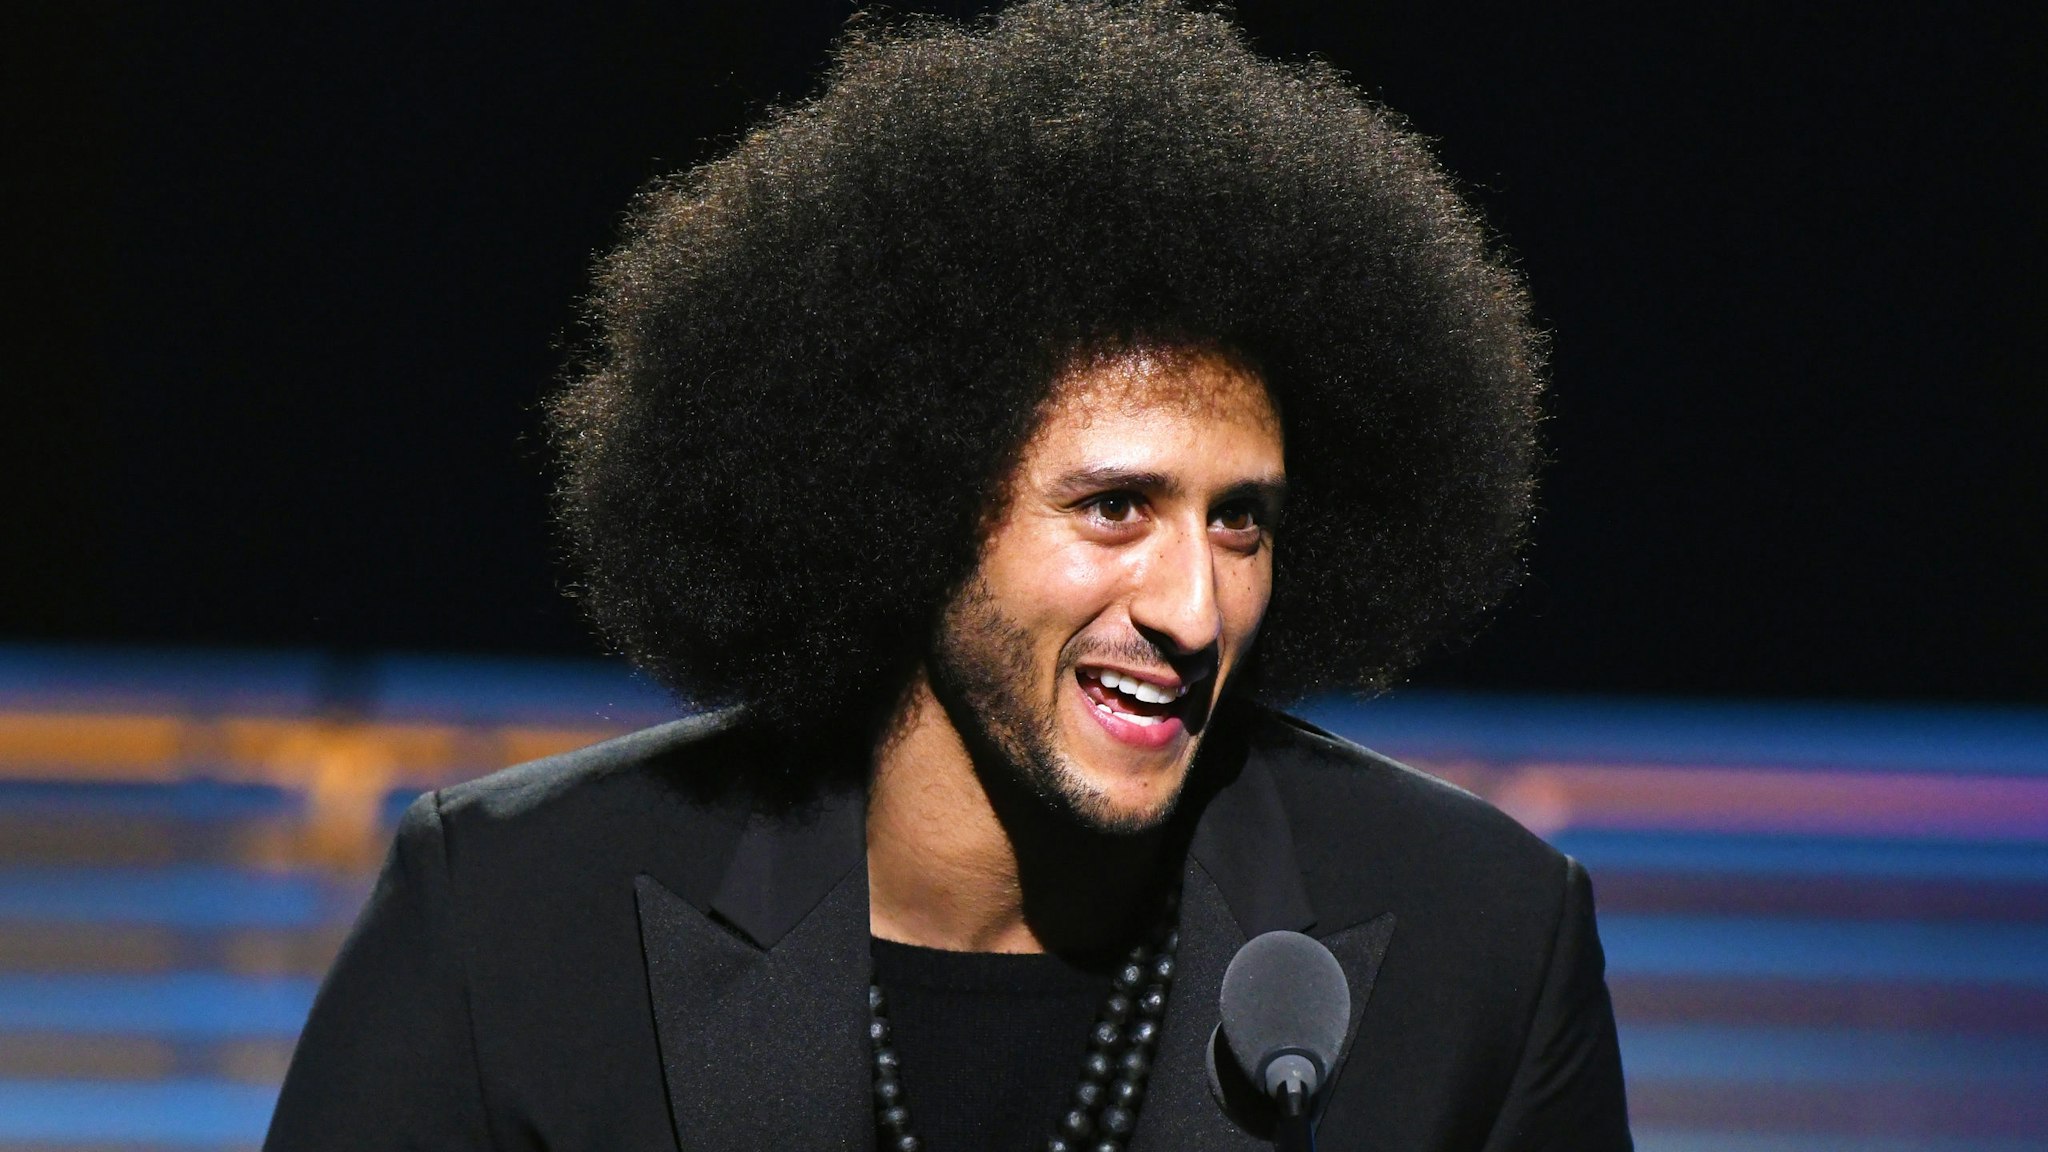 NEW YORK, NY - DECEMBER 05: Colin Kaepernick receives the SI Muhammad Ali Legacy Award during SPORTS ILLUSTRATED 2017 Sportsperson of the Year Show on December 5, 2017 at Barclays Center in New York City. Tune in to NBCSN on December 8 at 8 p.m. ET or Univision Deportes Network on December 9 at 8 p.m. ET to watch the one hour SPORTS ILLUSTRATED Sportsperson of the Year special.